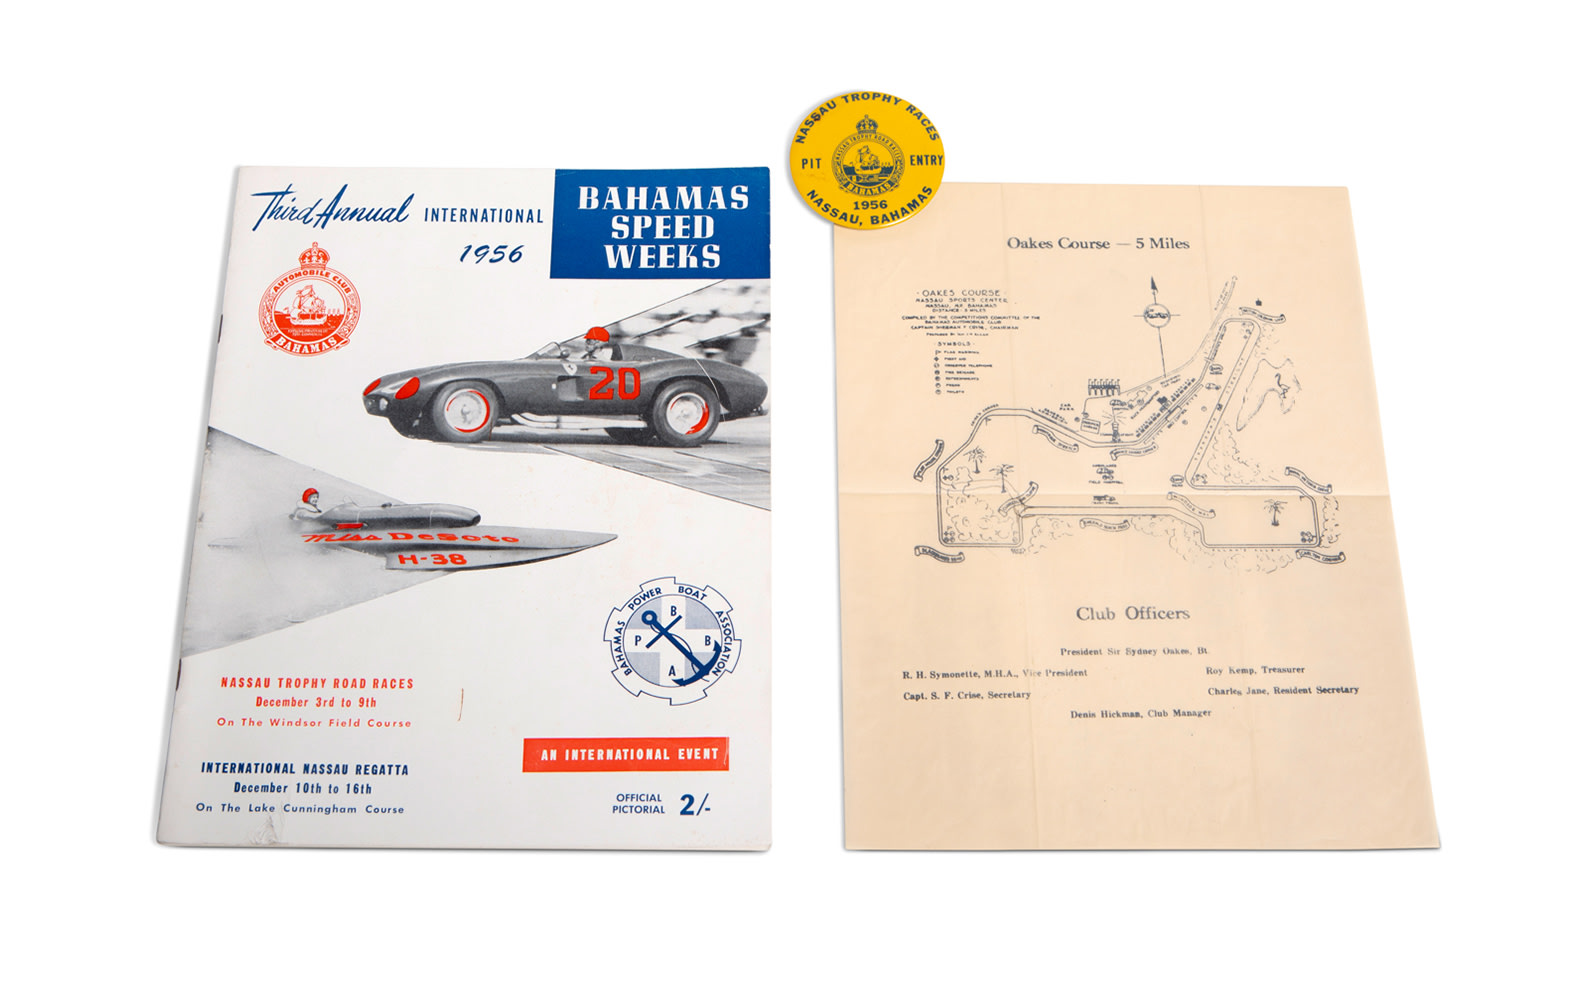 1956 Bahamas Speed Weeks Official Race Program, Pit Entry Pin, and Course Map